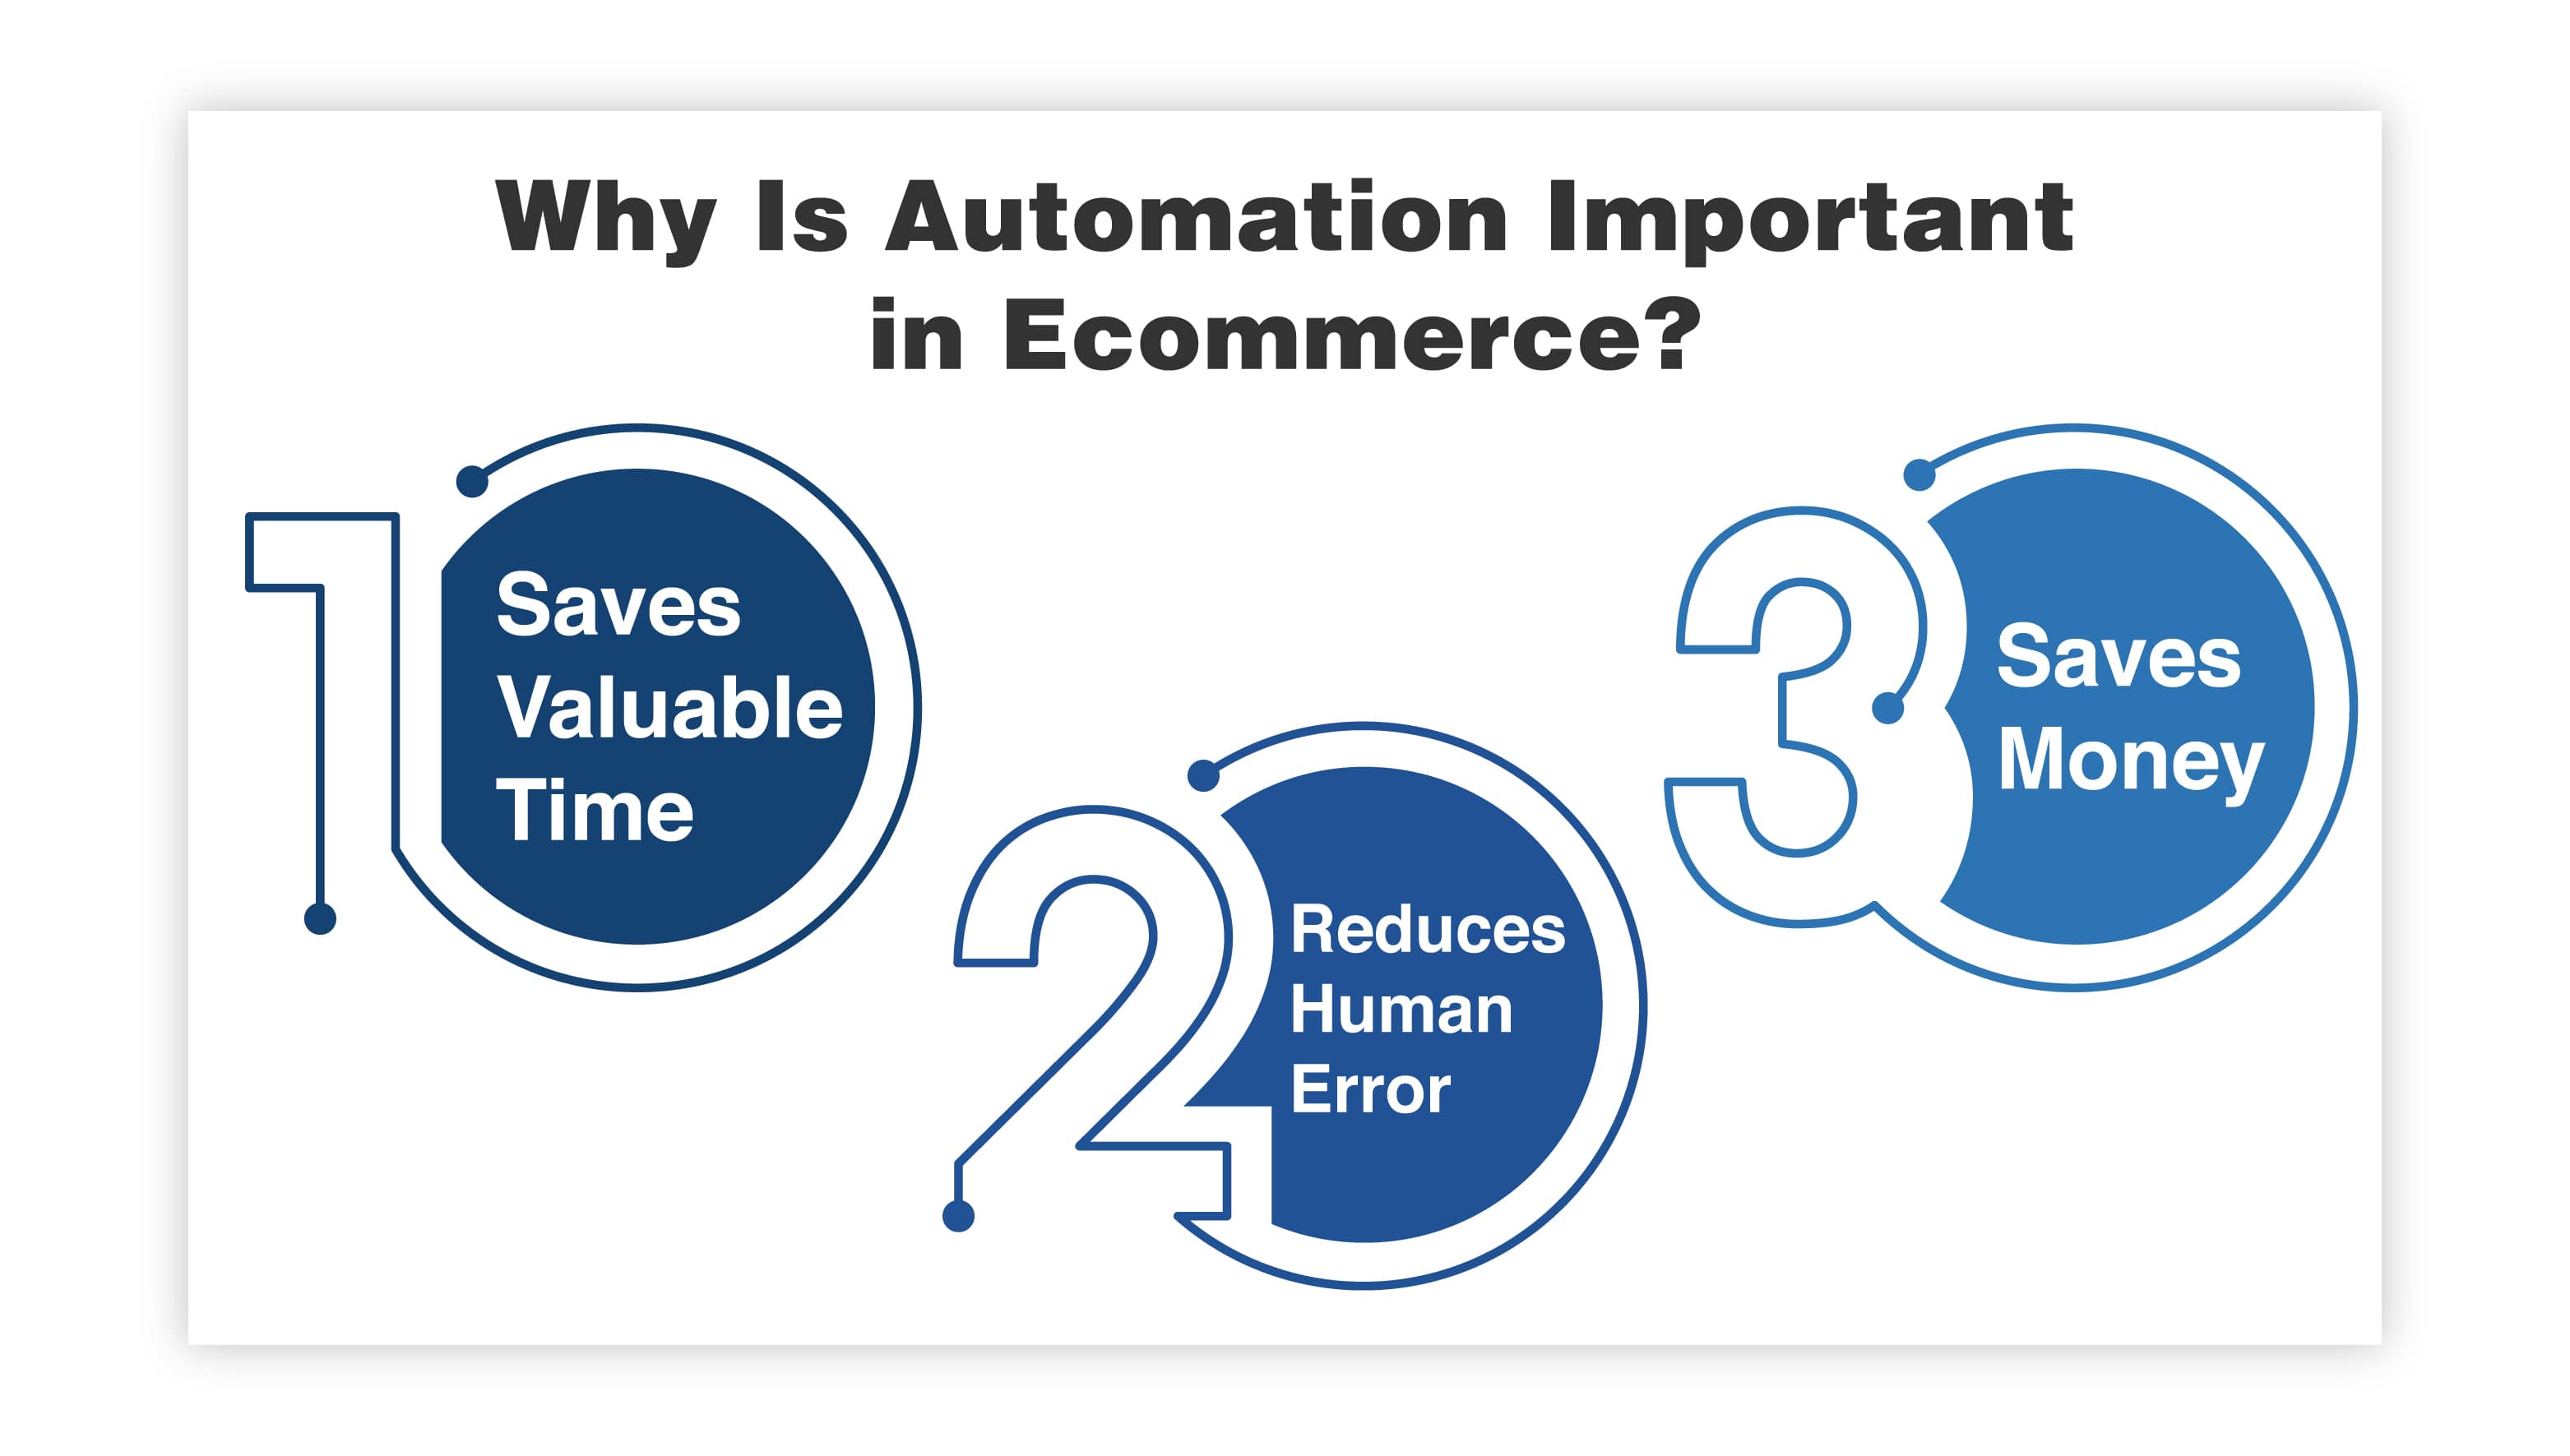 Why Is Automation Important in Ecommerce?